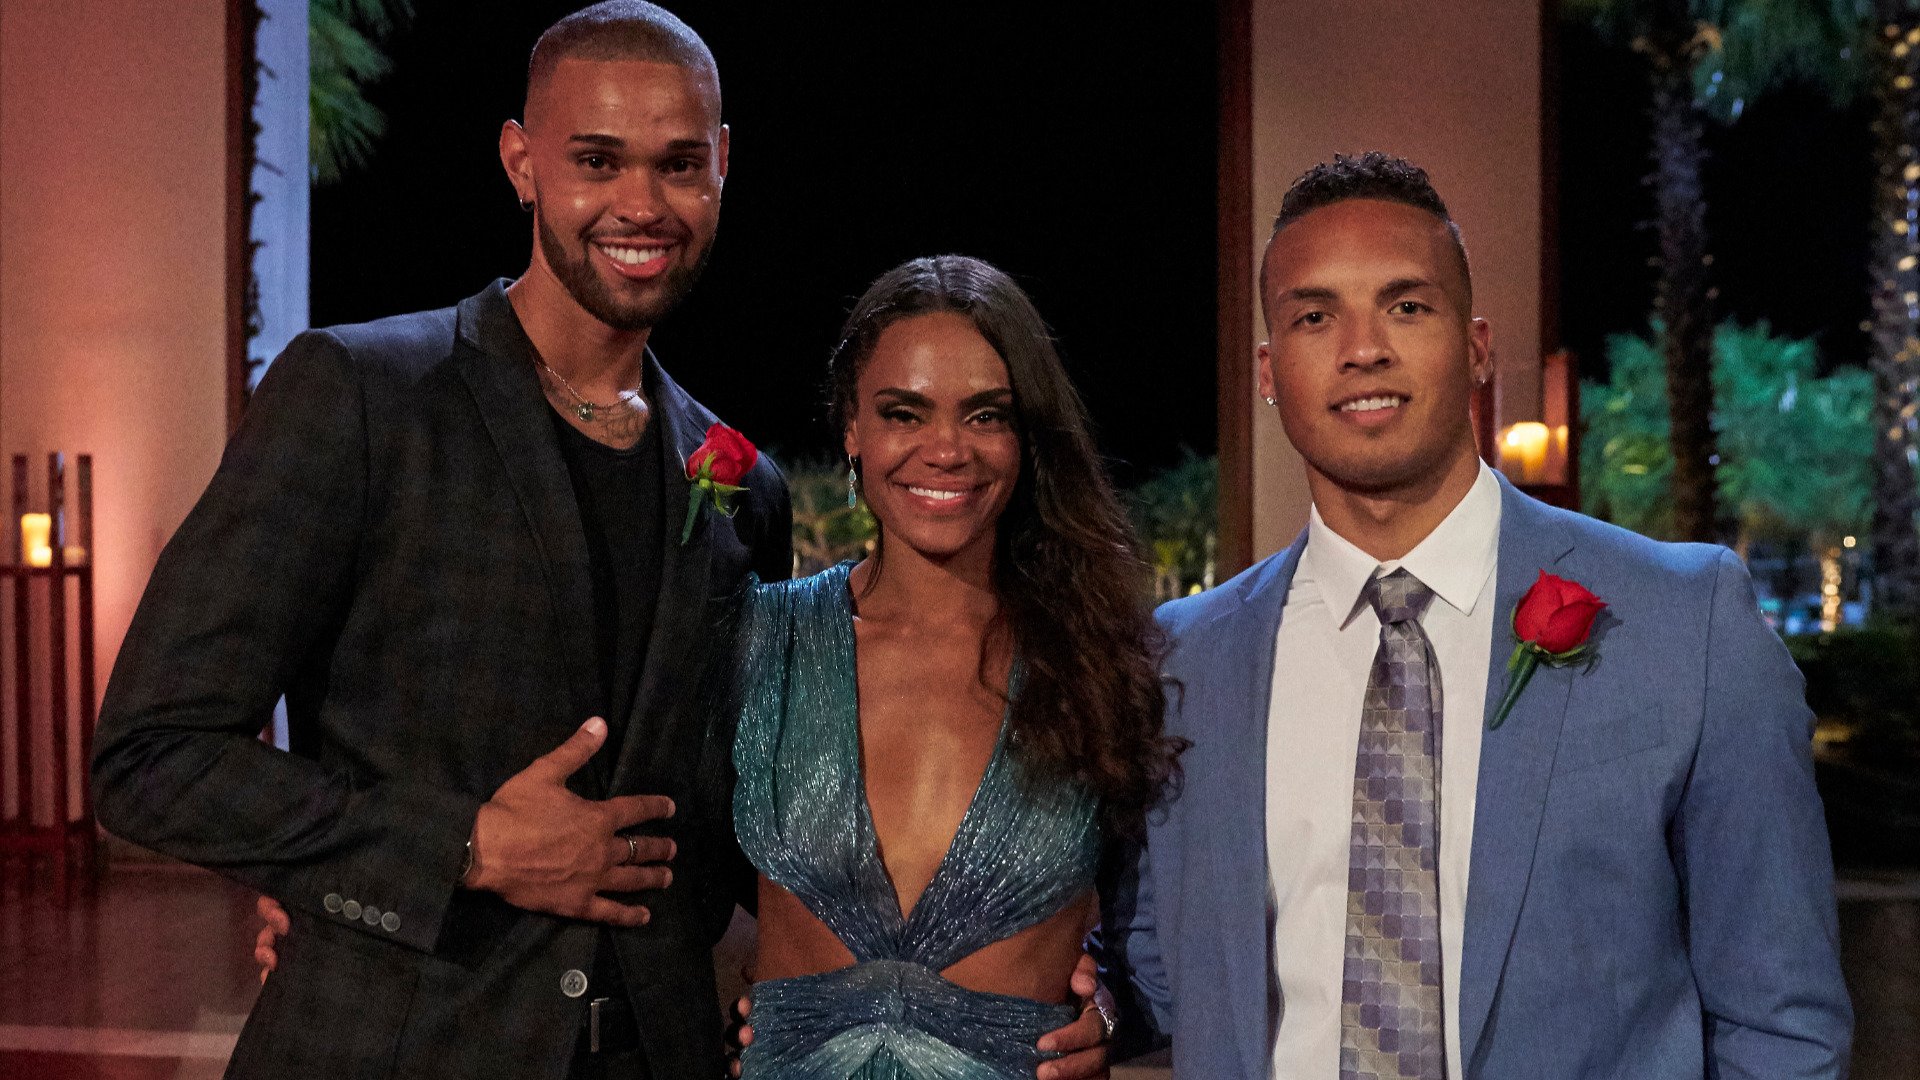 Michelle Young stands together with her final two picks Nayte Olukoya and Brandon Jones before ‘The Bachelorette’ Season 18 finale in 2021